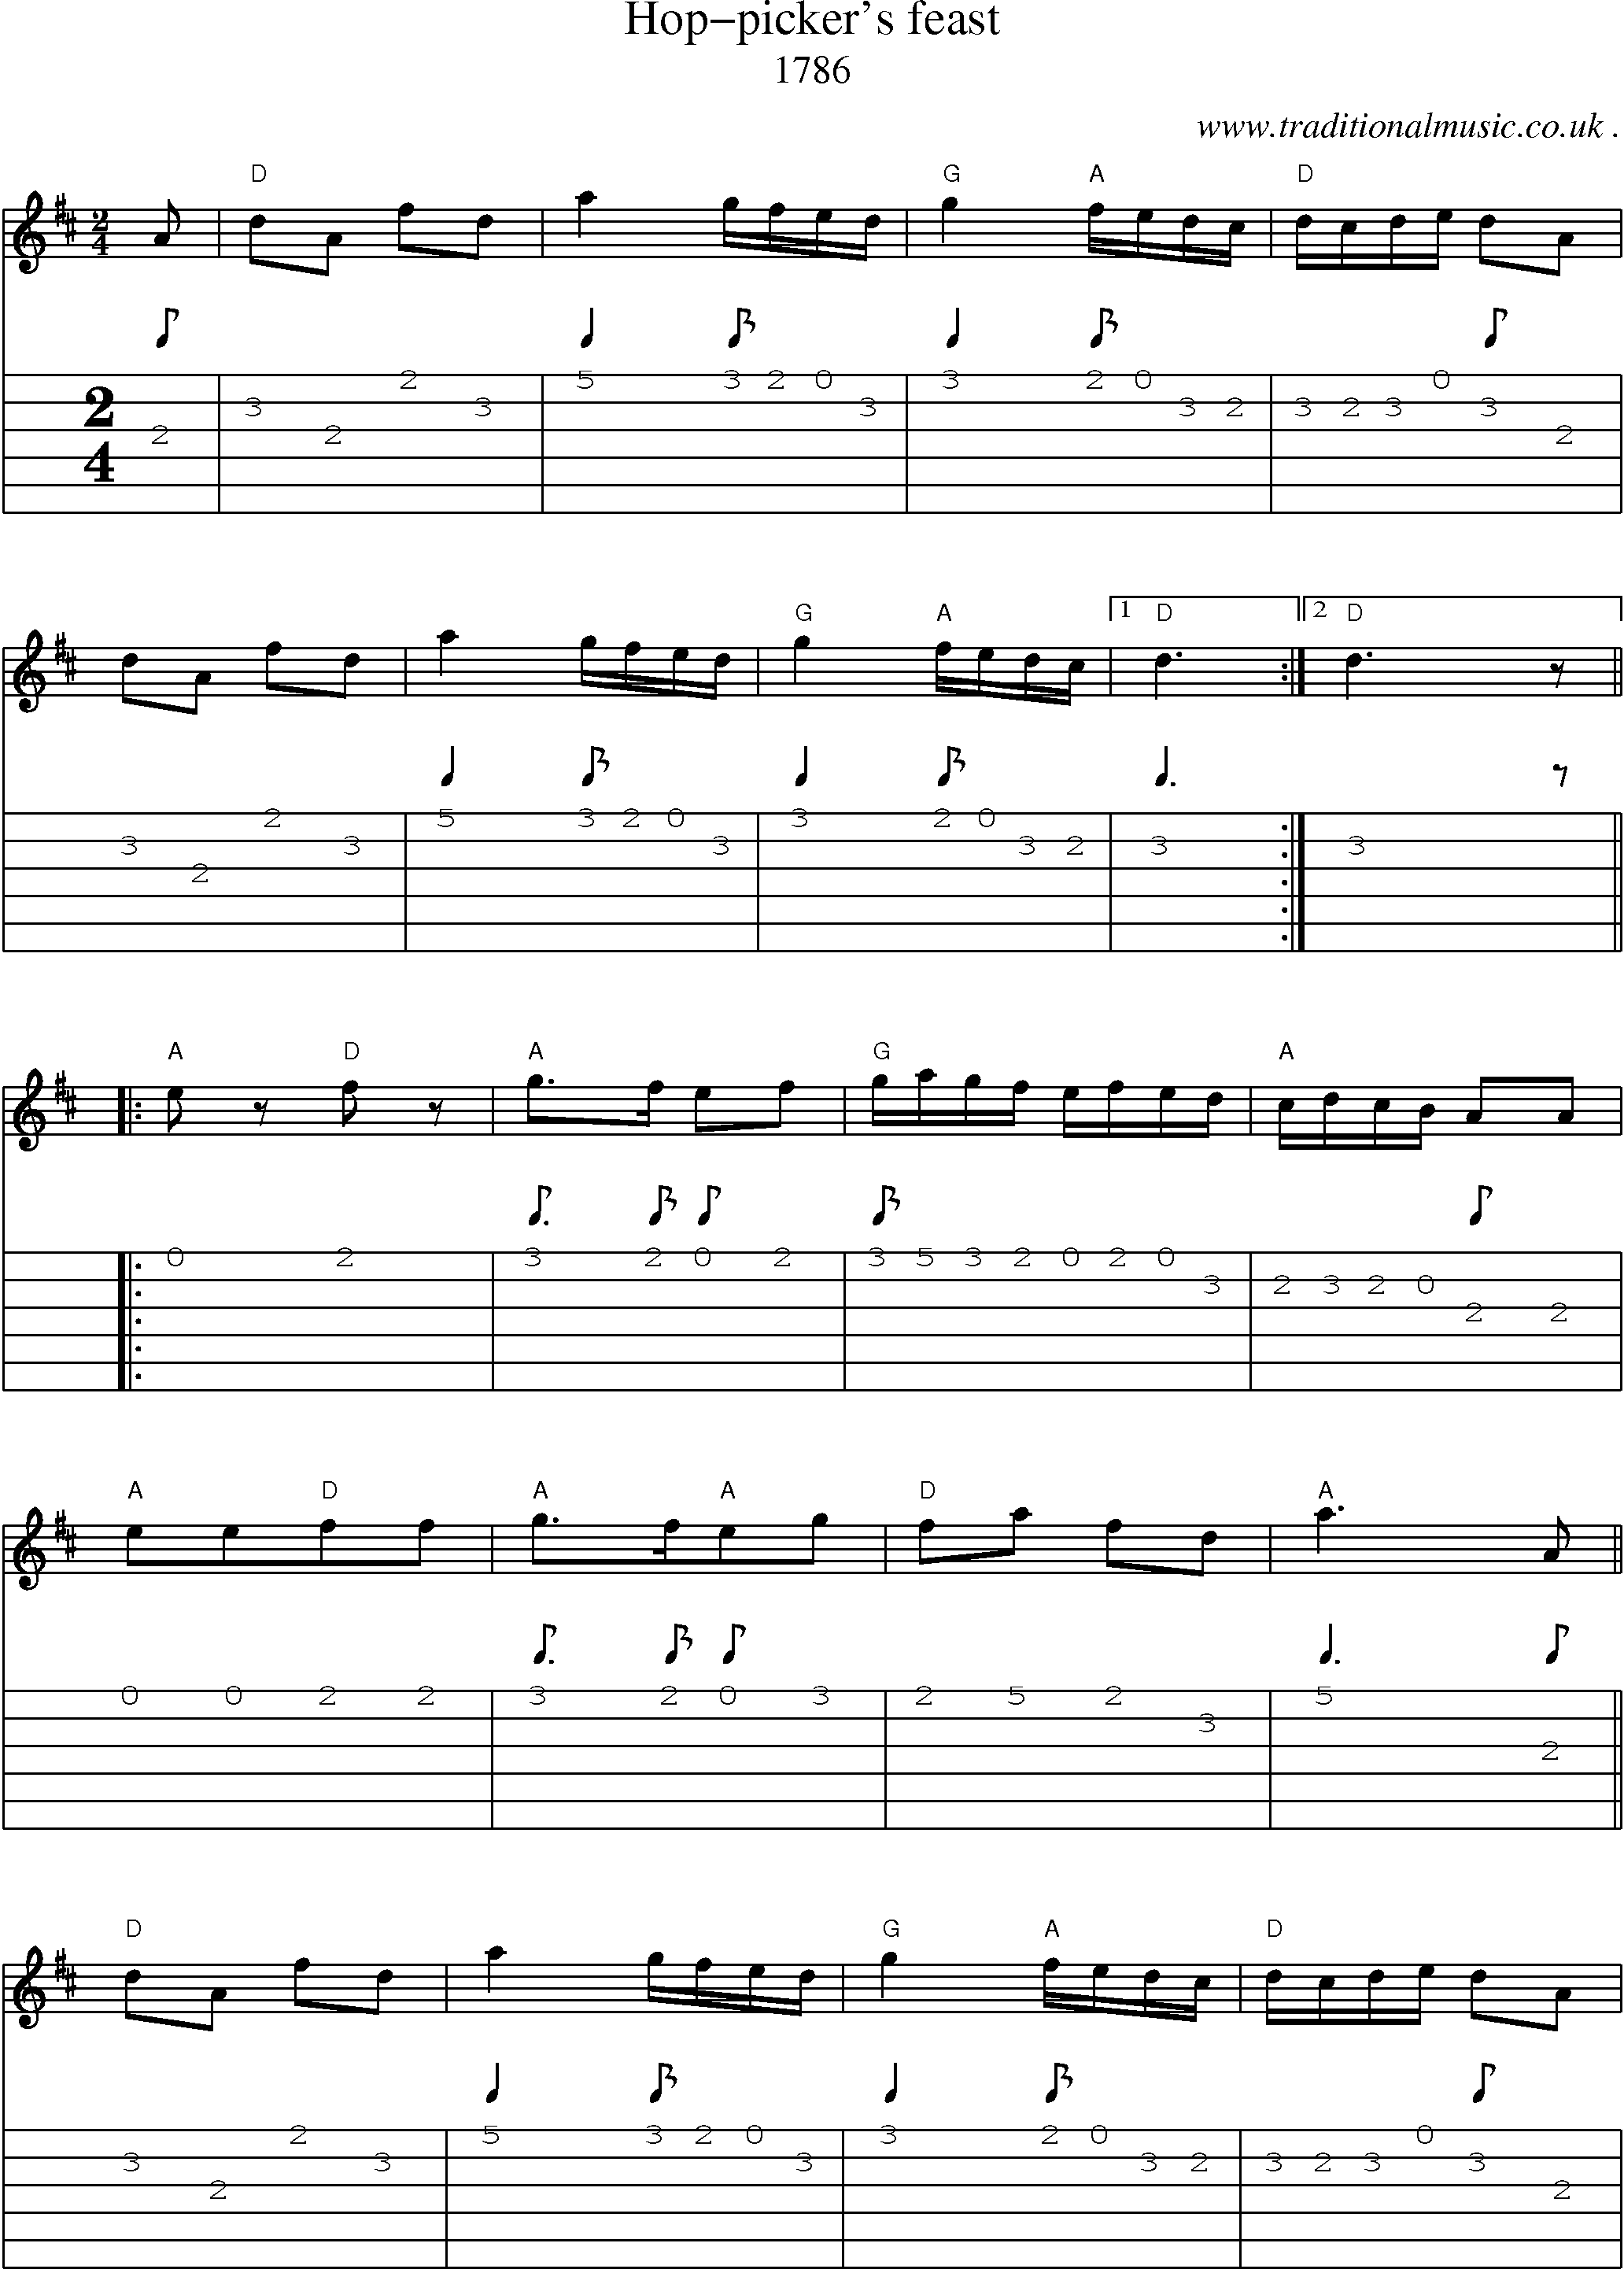 Sheet-Music and Guitar Tabs for Hop-pickers Feast